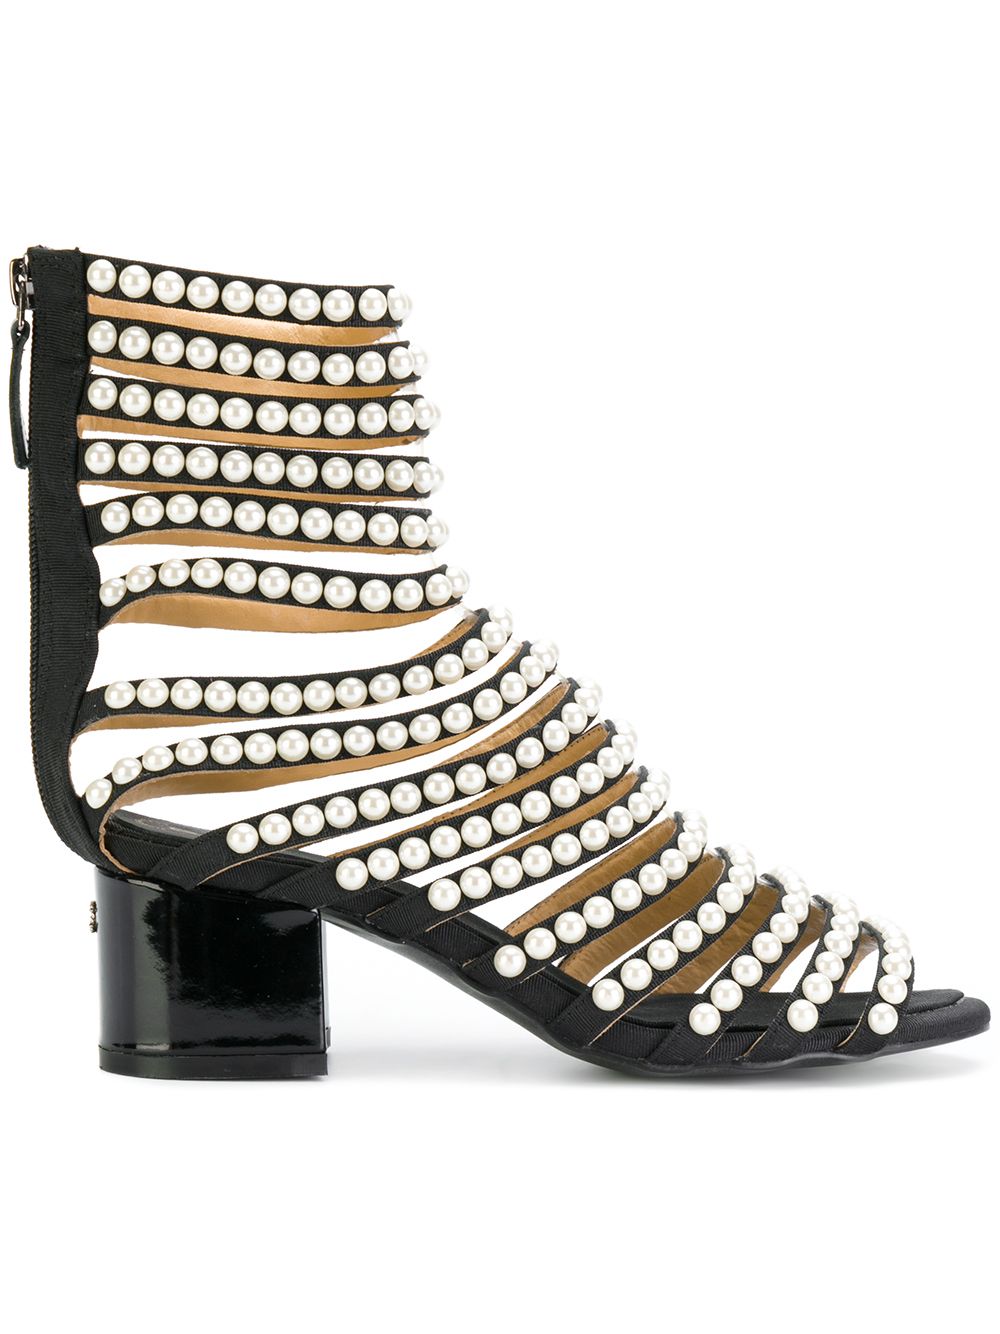 CHANEL Pre-Owned Faux Pearl Embellished Cage Sandals - Farfetch